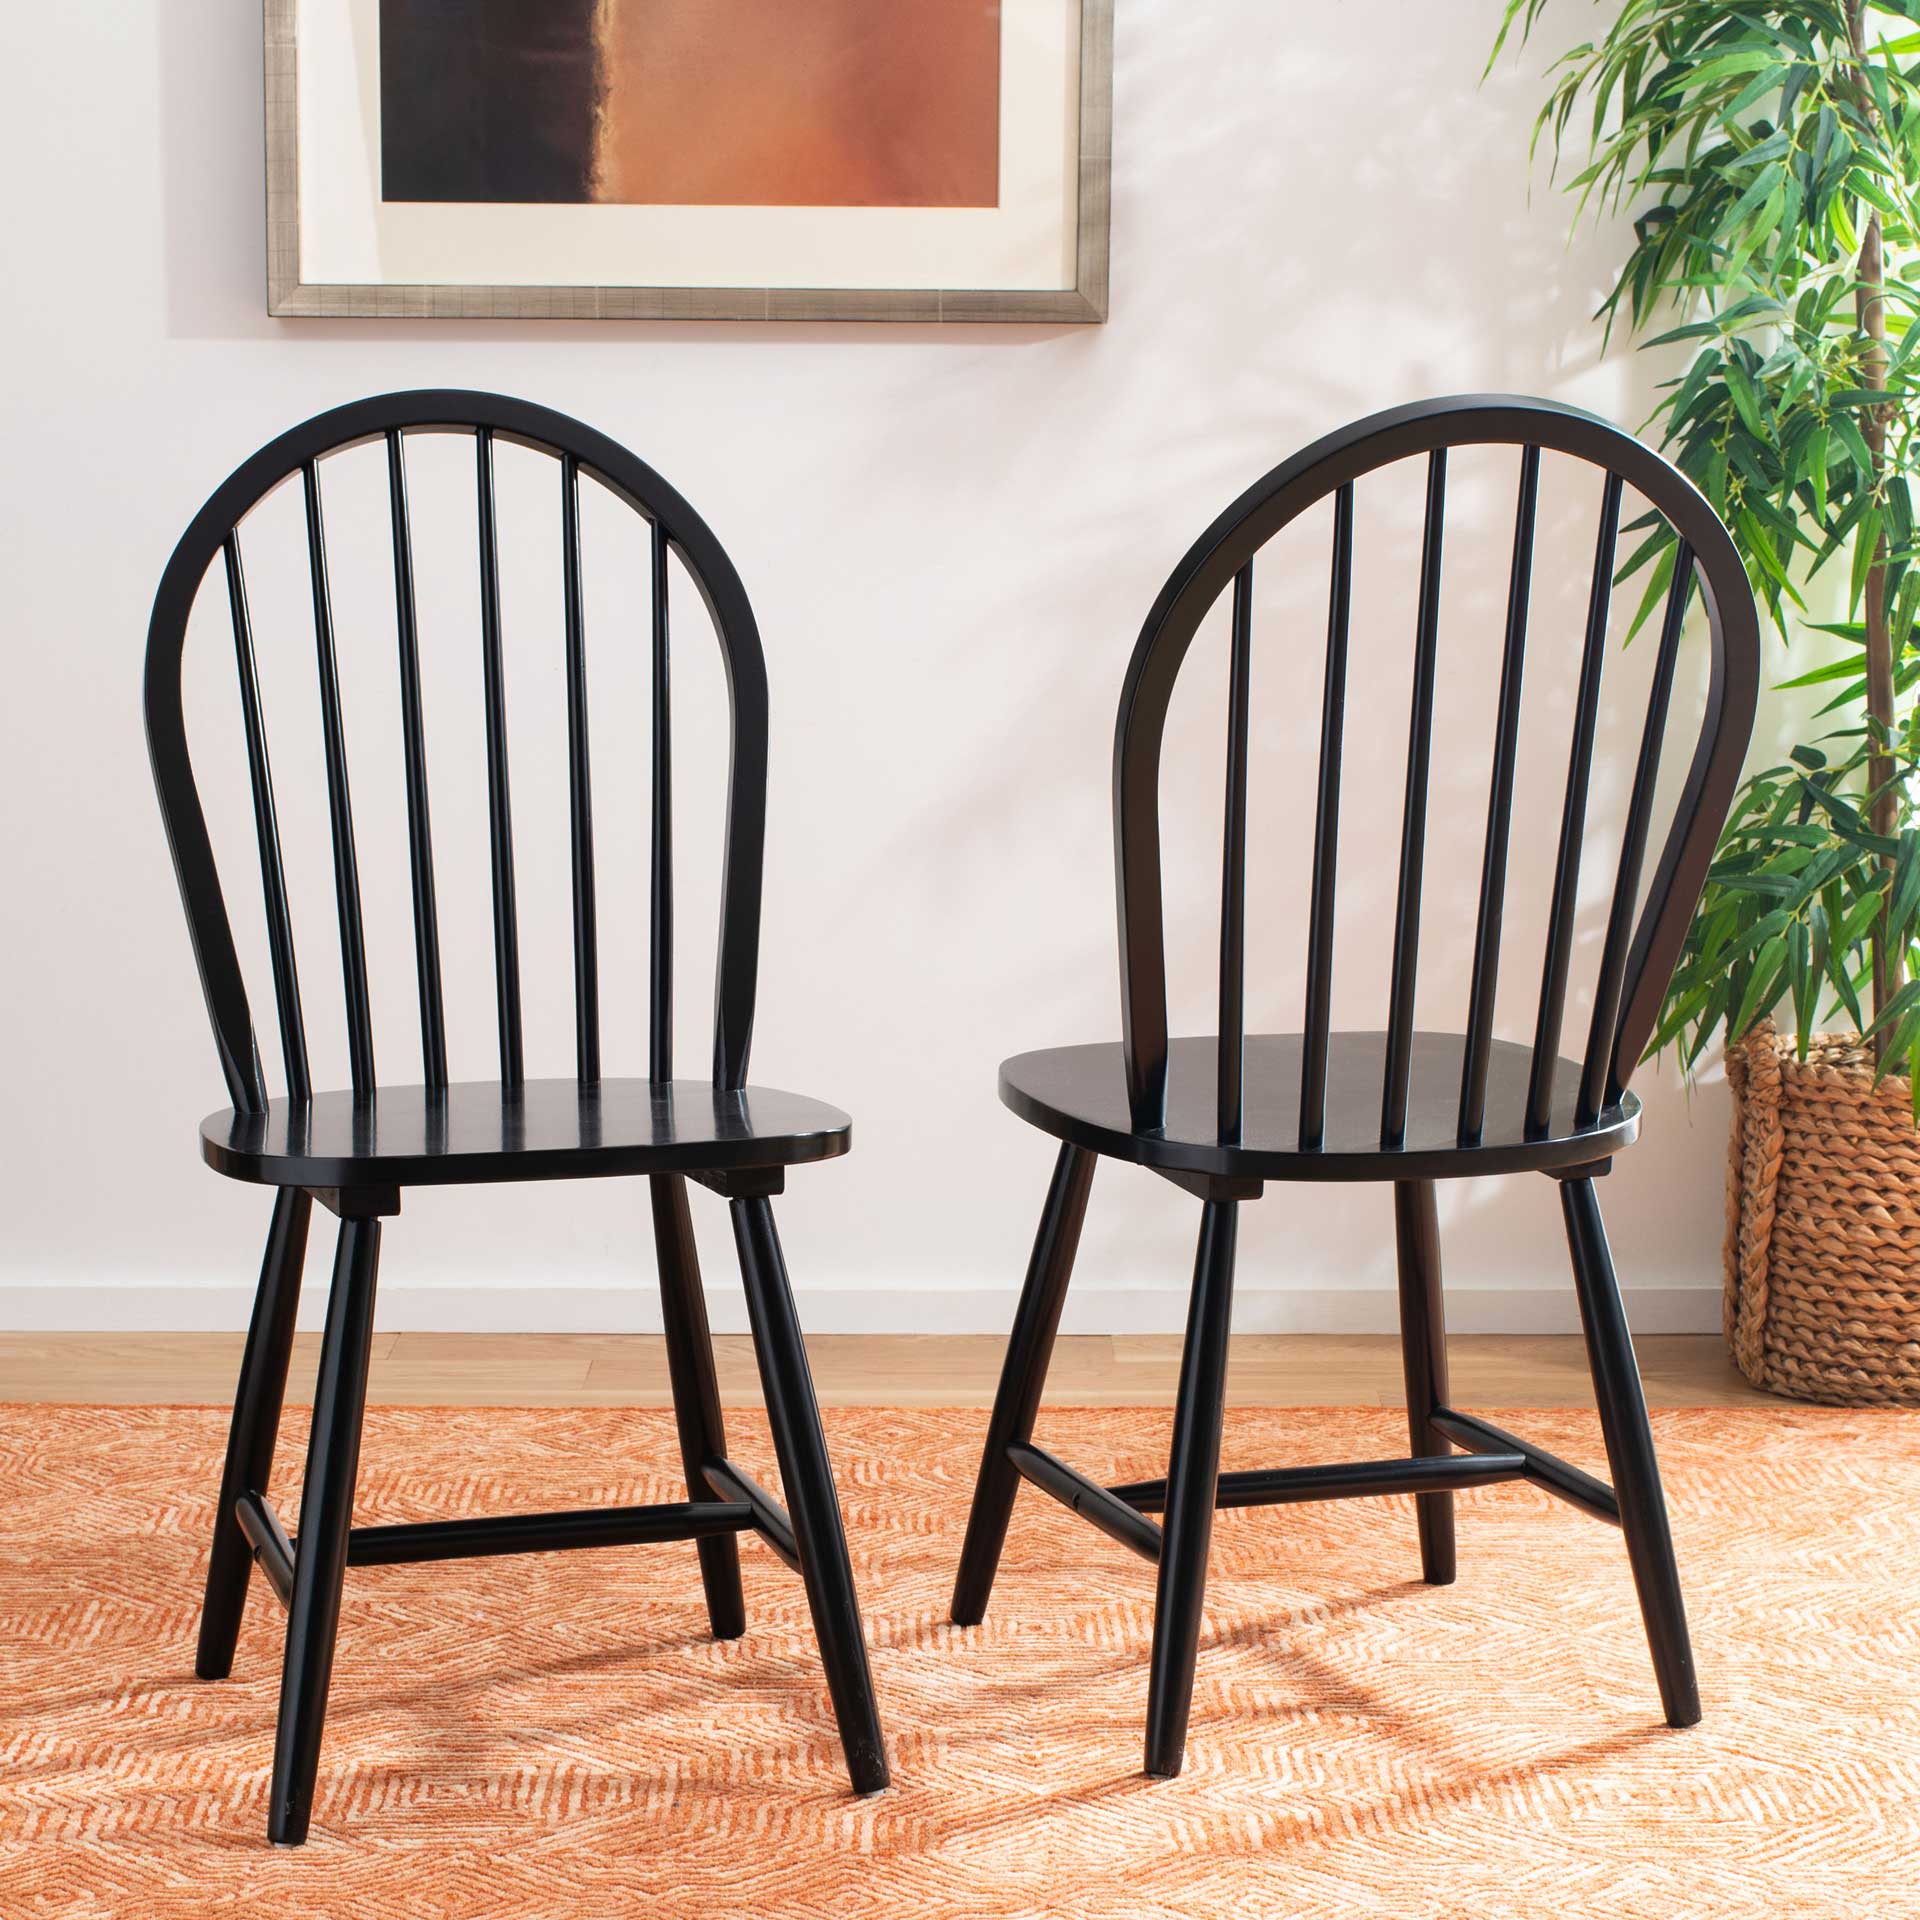 Calista Spindle Back Chair Black (Set of 2)